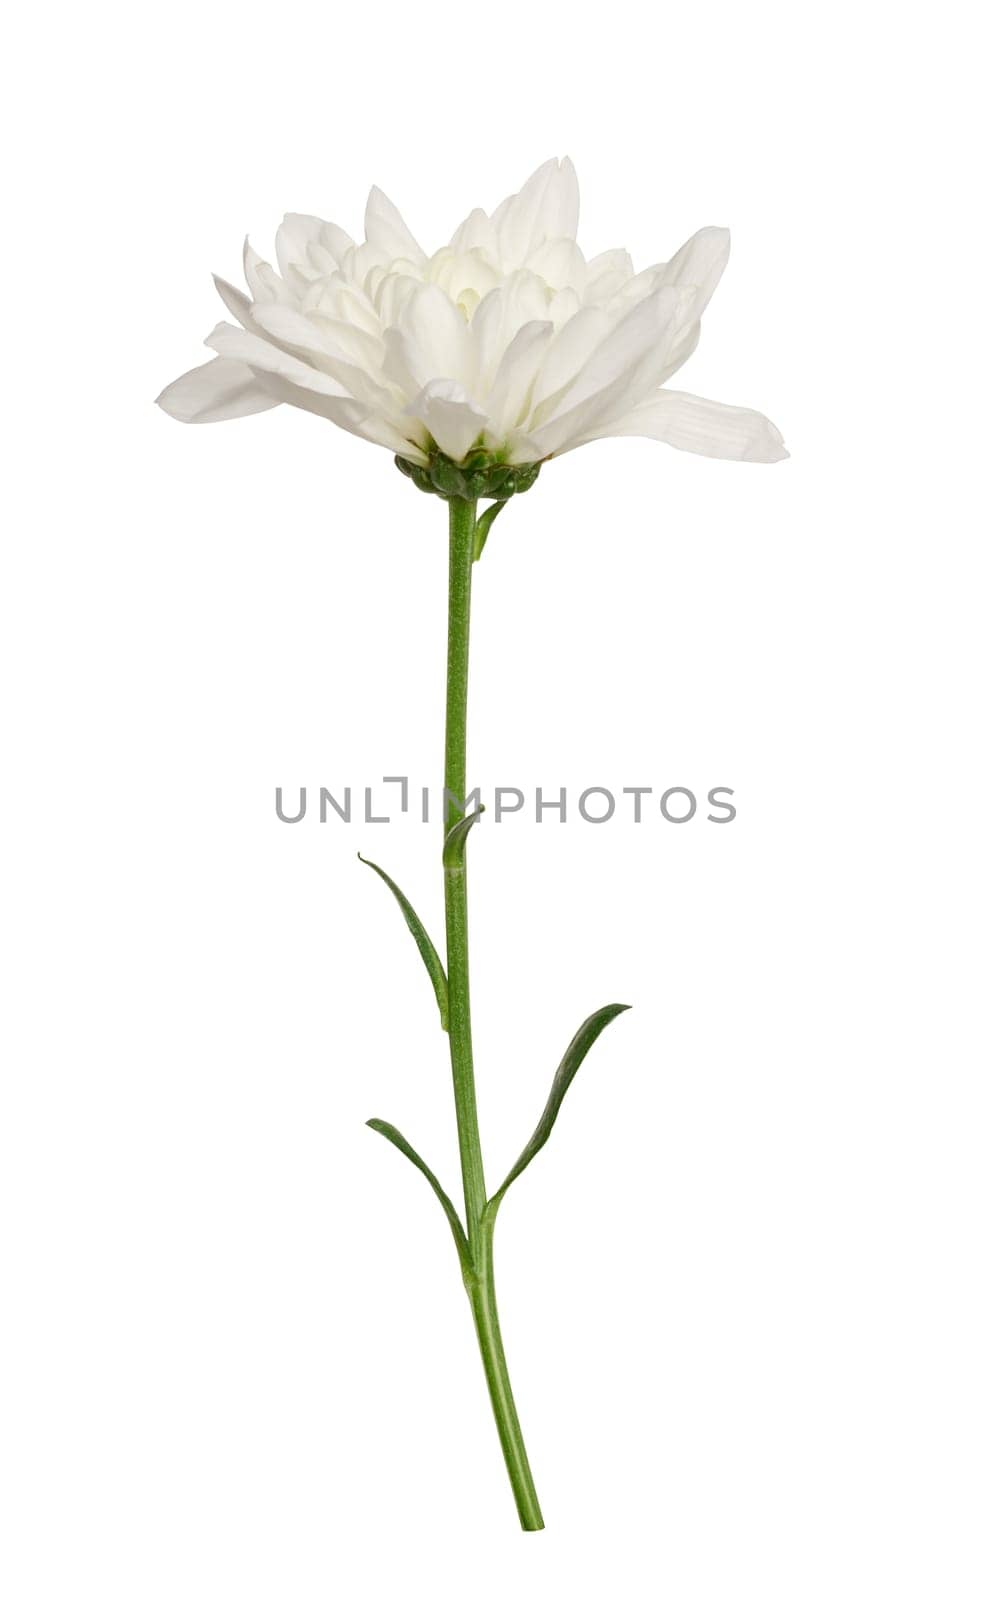 White chrysanthemum bud on green stem with leaves, isolated background by ndanko